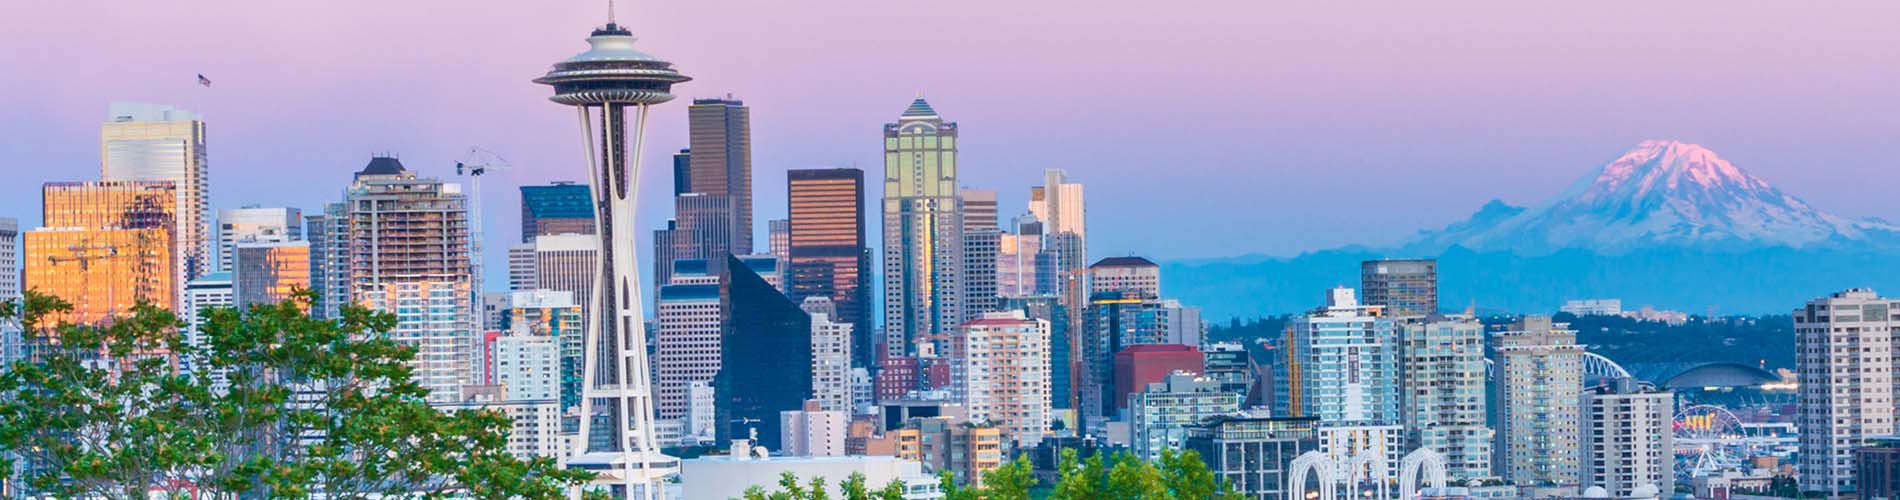 A skyline image of Downtown Seattle.